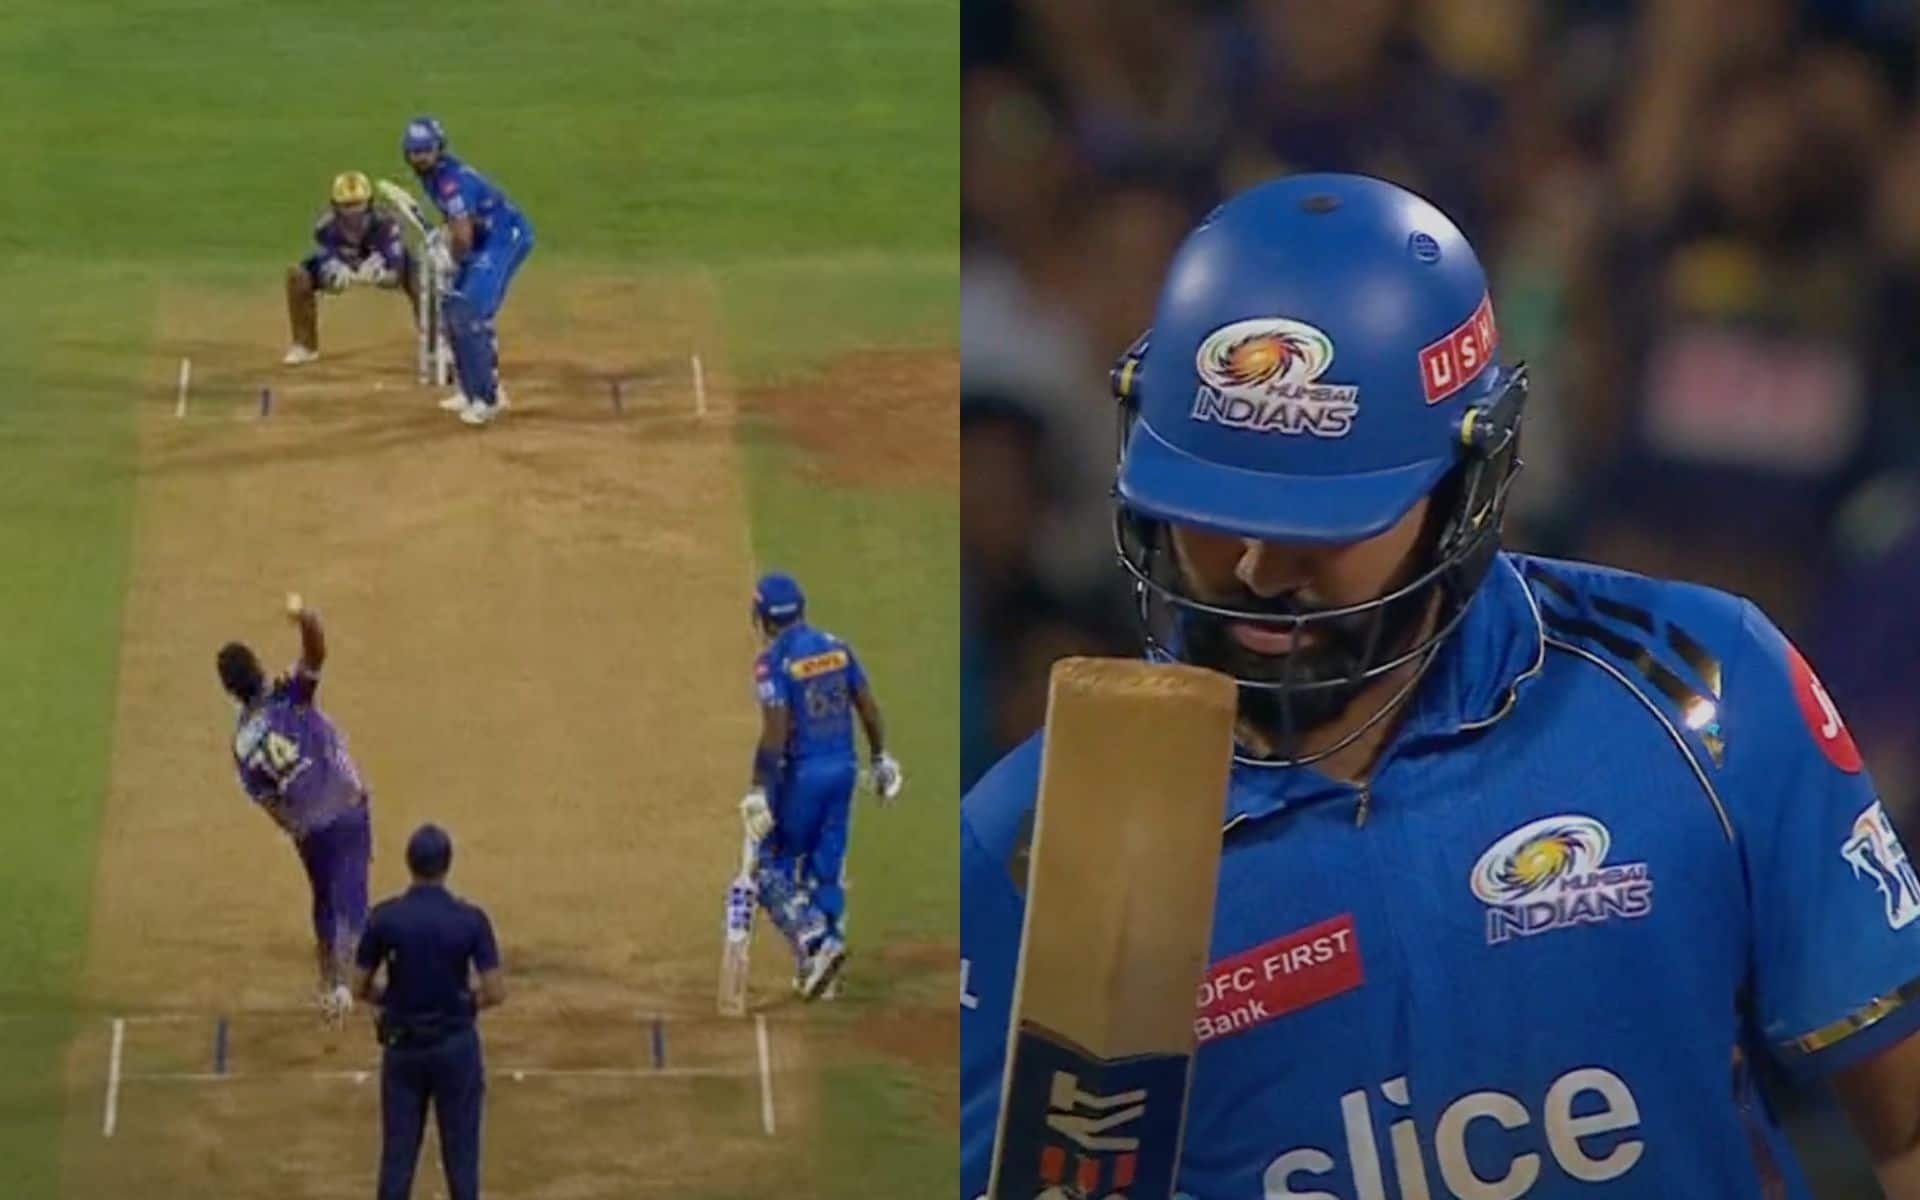 Rohit Sharma looks at his bat after losing his wicket vs KKR (X.com)